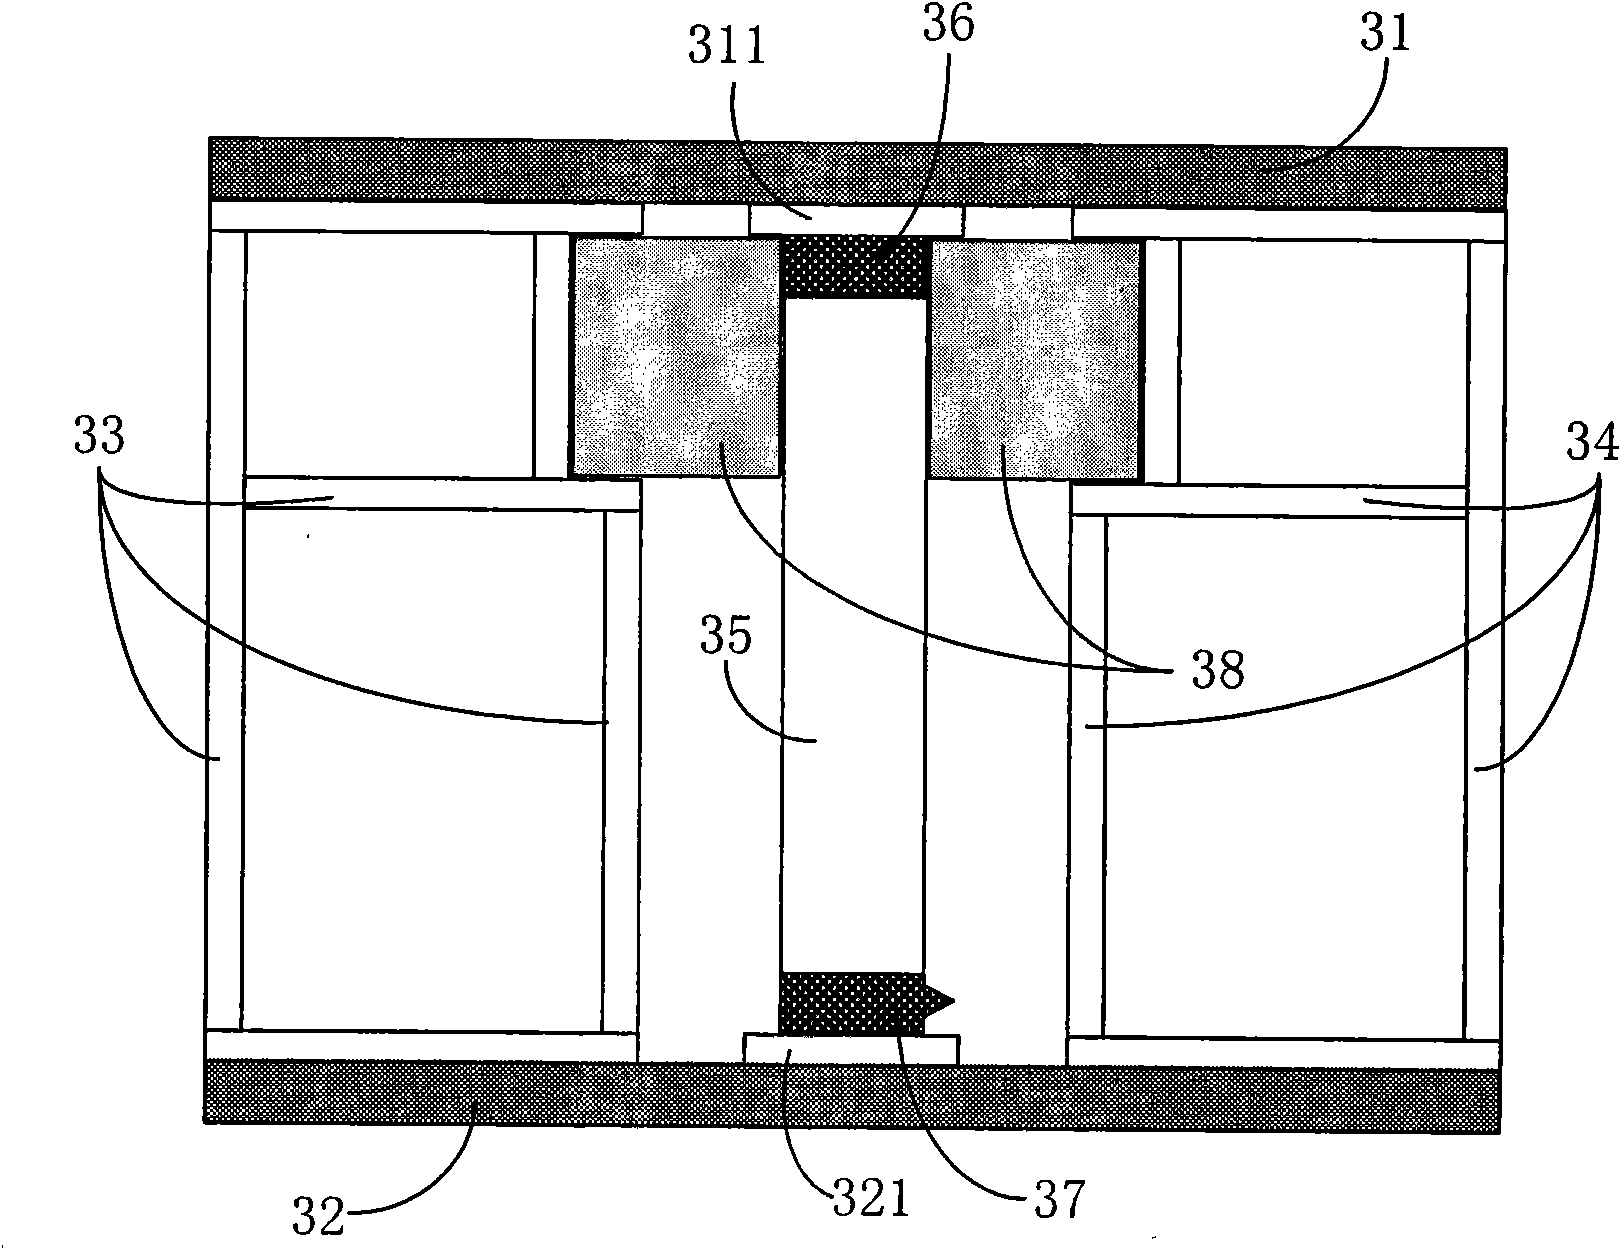 Circuit board connector and communication equipment